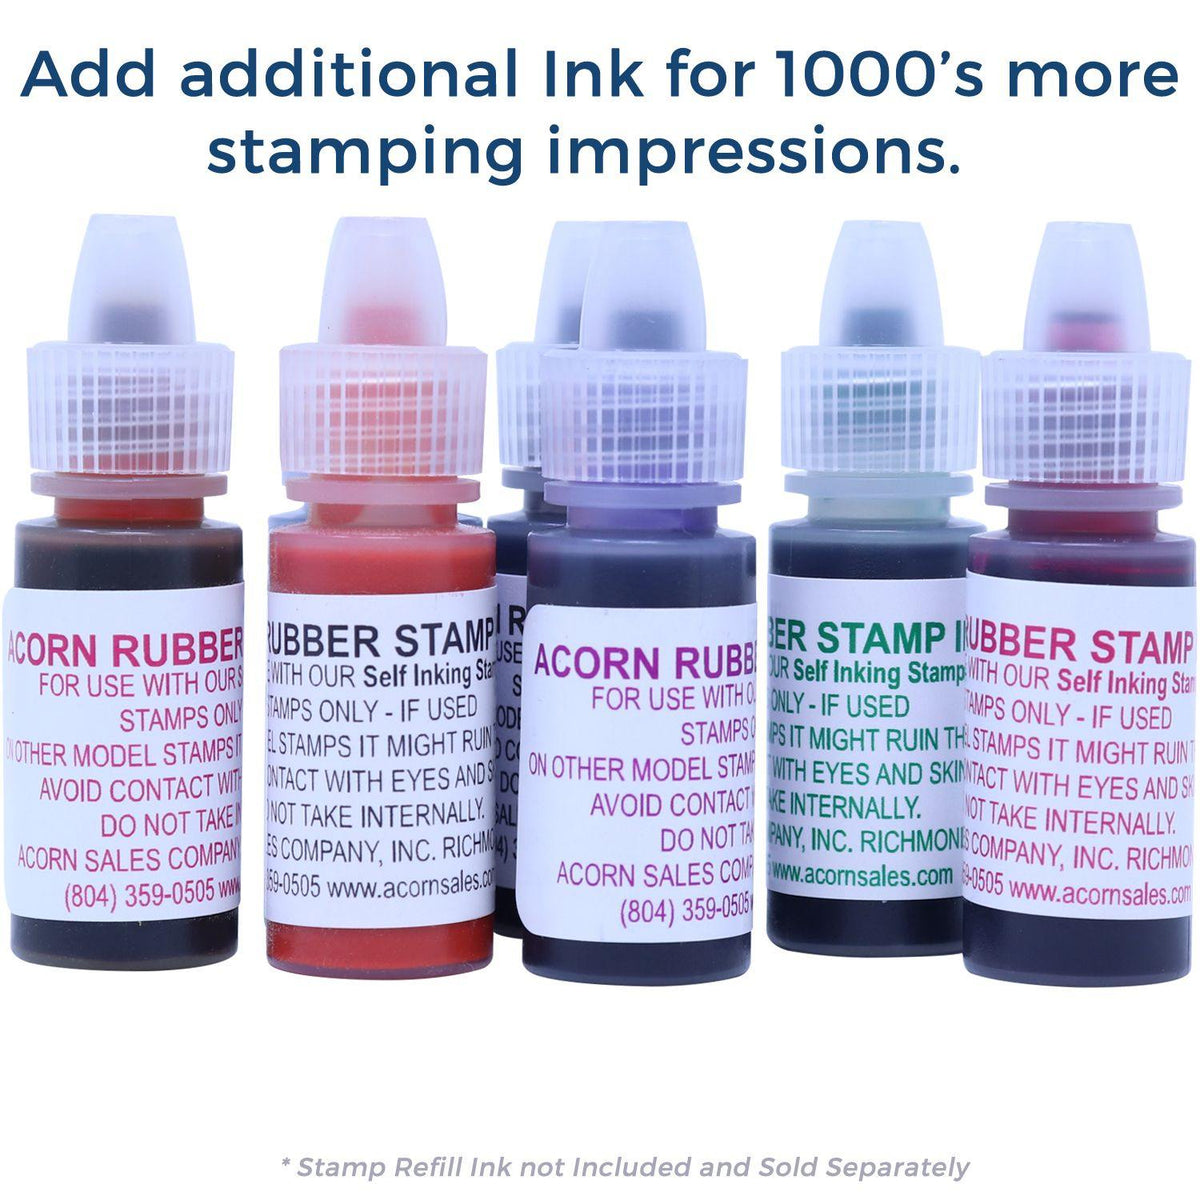 Refill Inks for Large Pre Inked Forgery Stamp Available